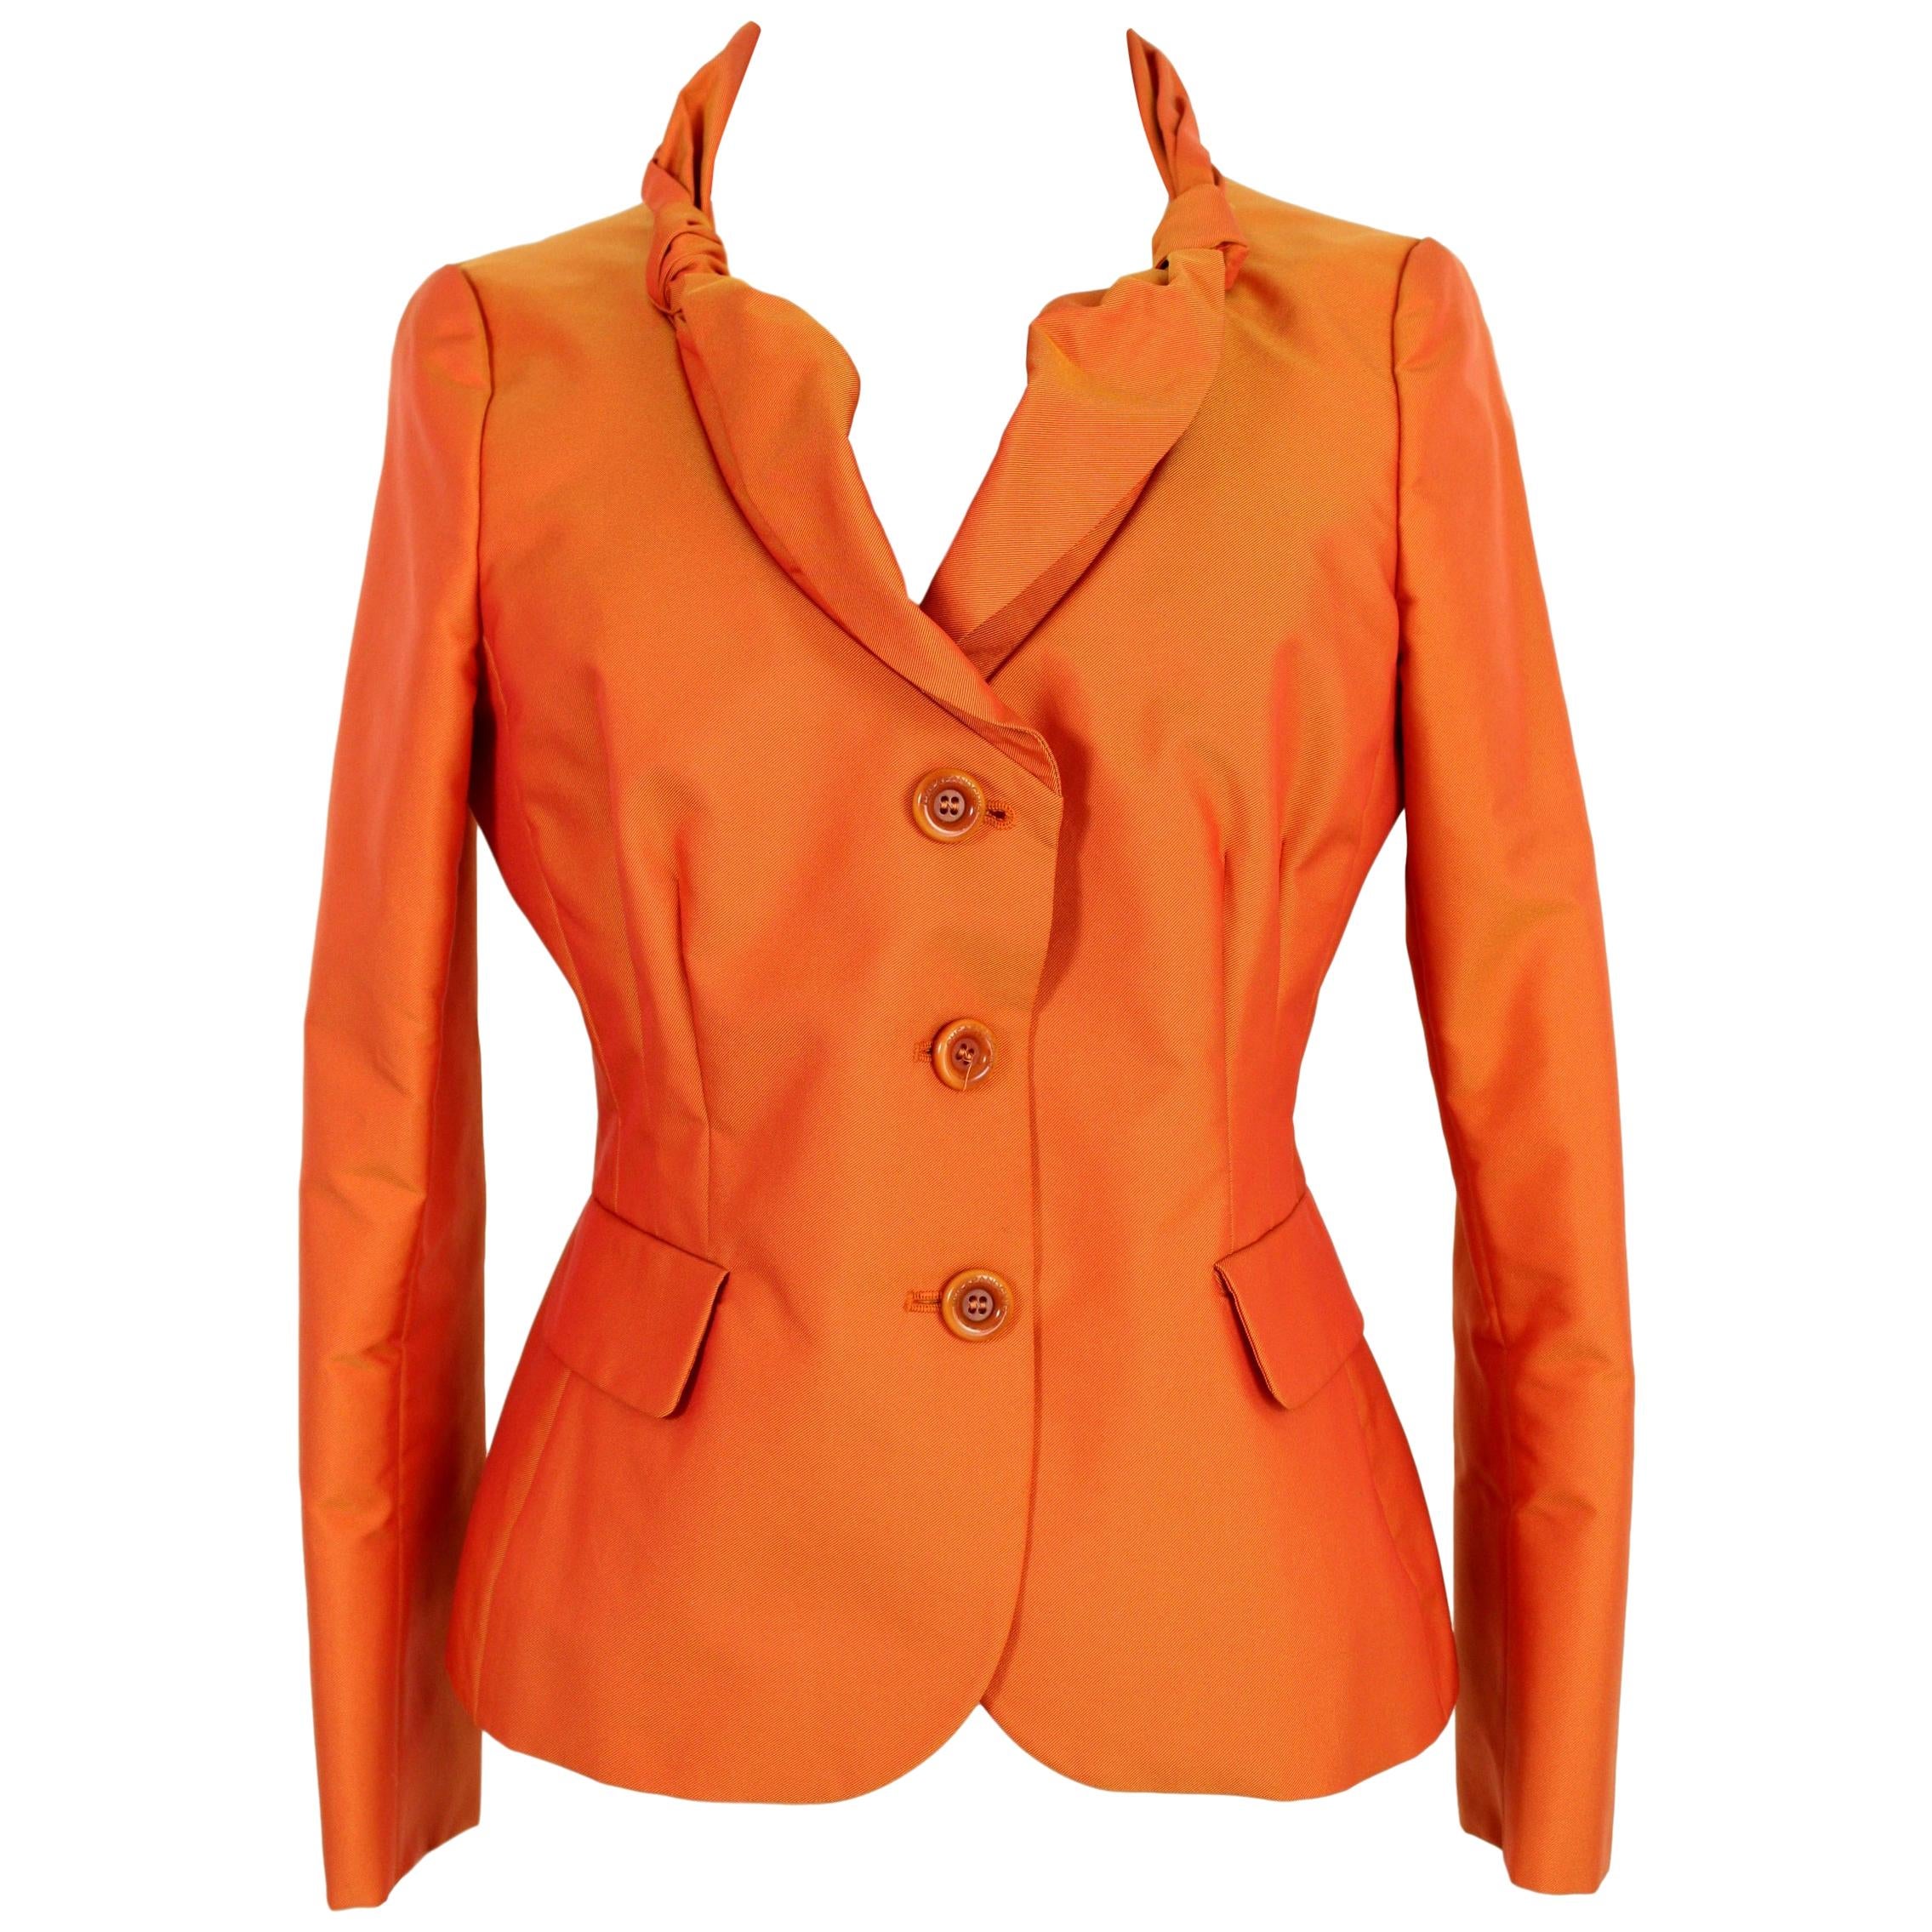 Moschino Cheap and Chic Orange Fitted Classic Dinner Jacket